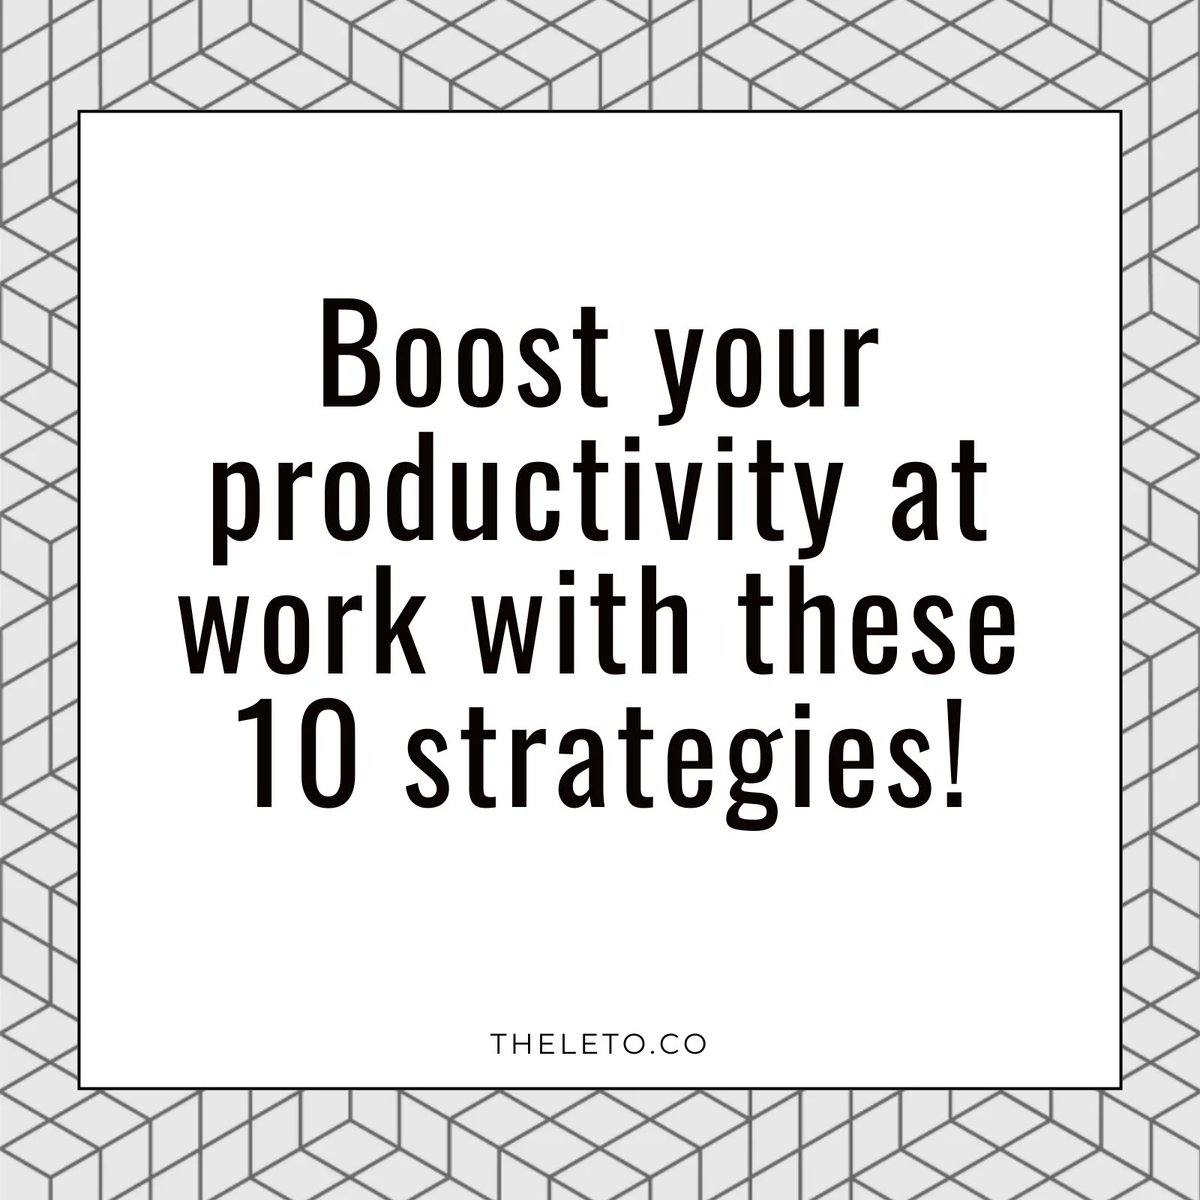 📣 Boost your productivity at work with these 10 proven strategies! 💼💪
#ProductivityTips #WorkSmarterNotHarder #BoostYourPerformance #StayFocused #AchieveSuccess
#worksmarternotharder #stayfocused #achievesuccess #cleargoalsahead